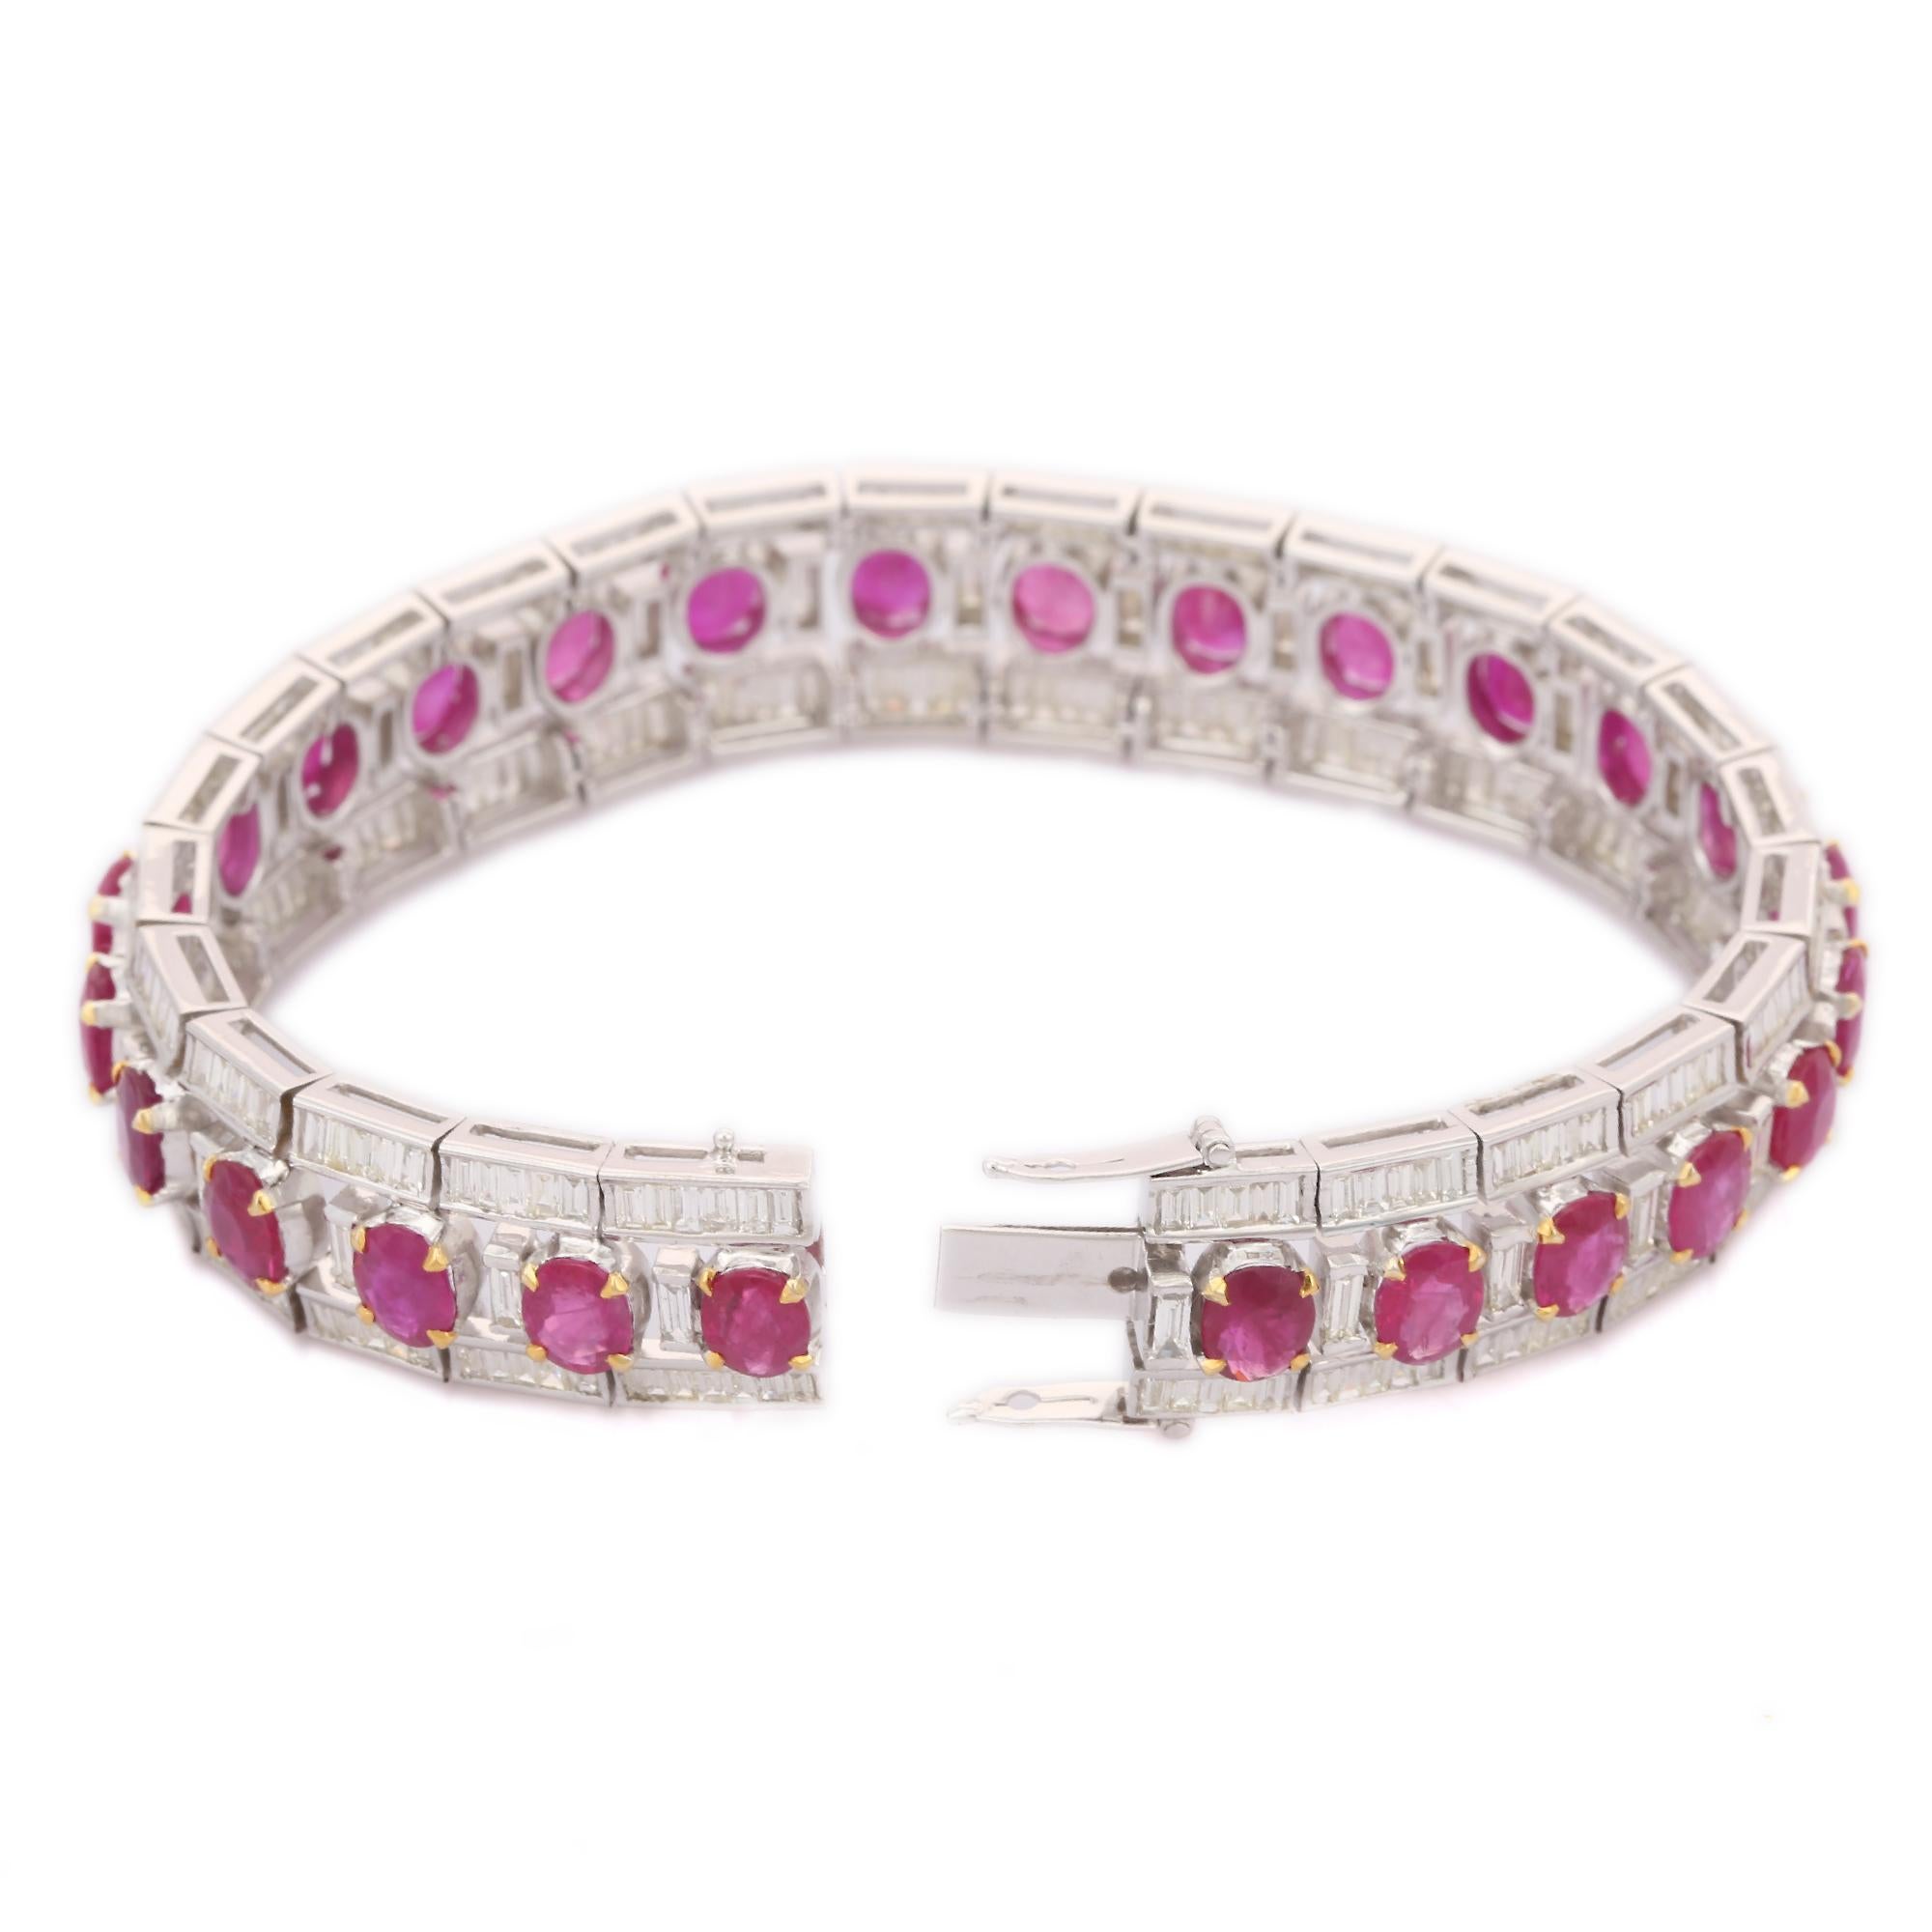 Oval Cut 18kt Solid White Gold 8.5 CTW Diamond and 21 CTW Ruby Tennis Bracelet For Her For Sale